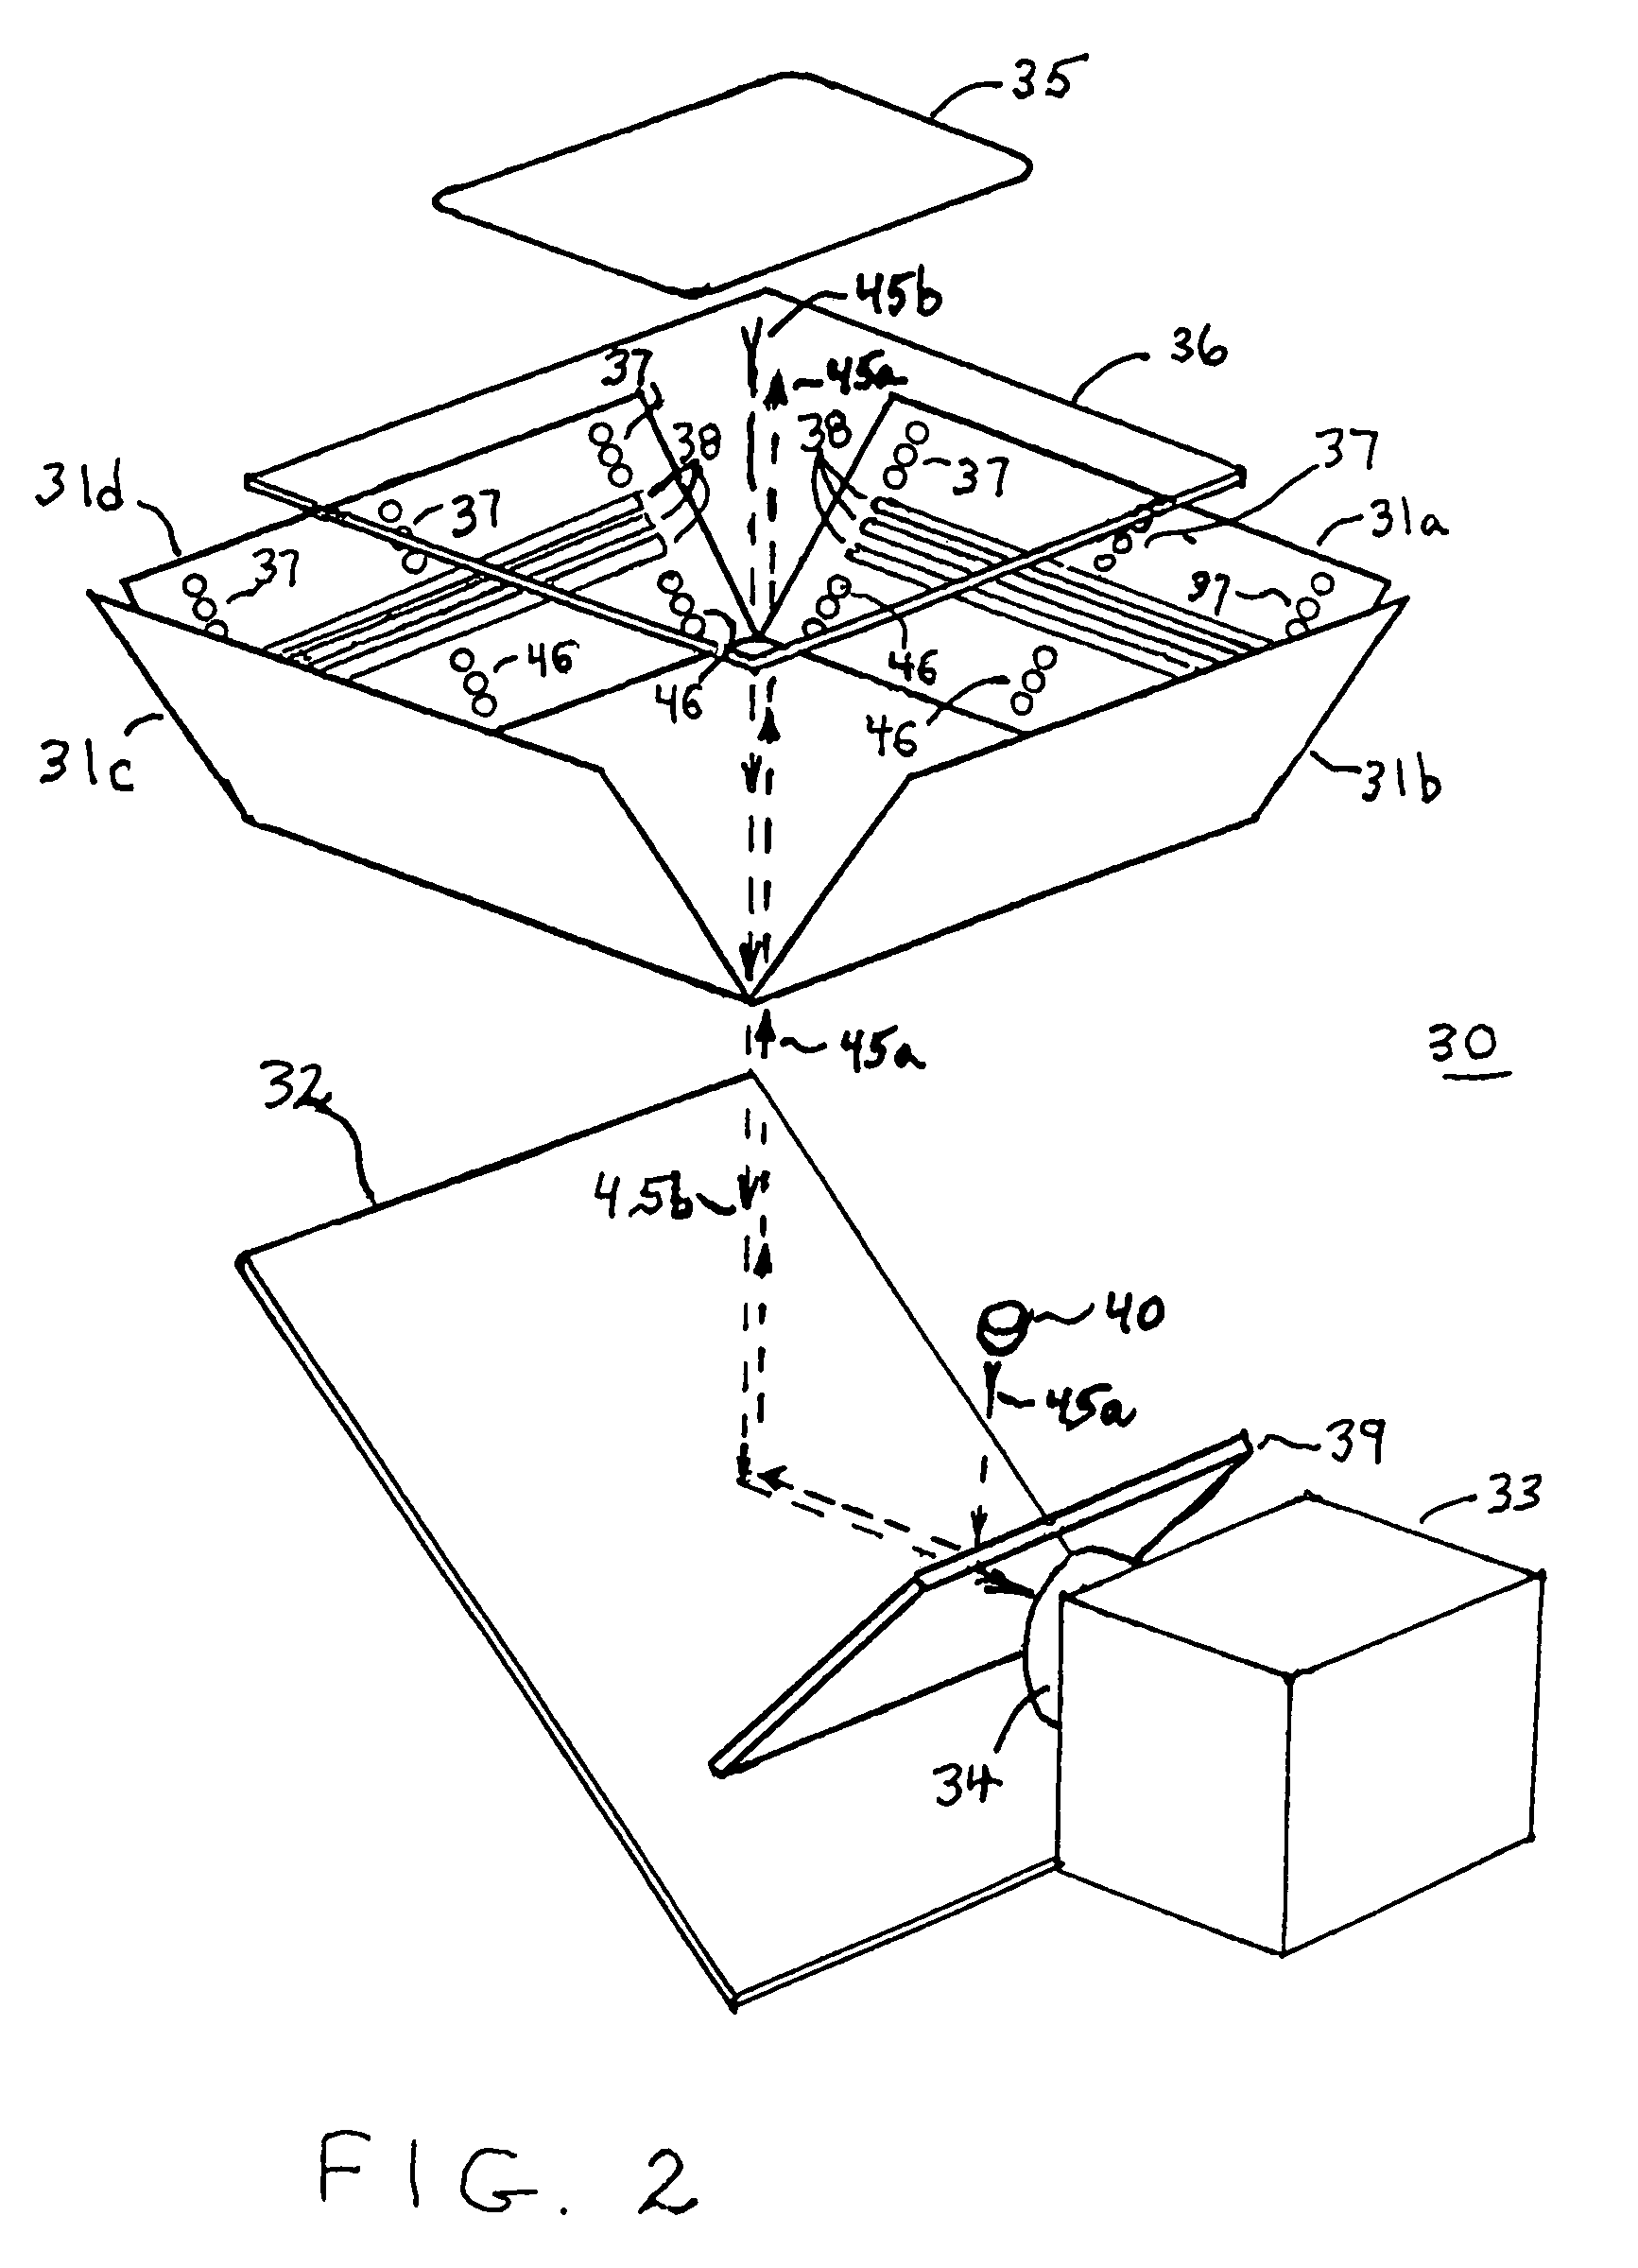 Method and system for a processor controlled illumination system for reading and analyzing materials